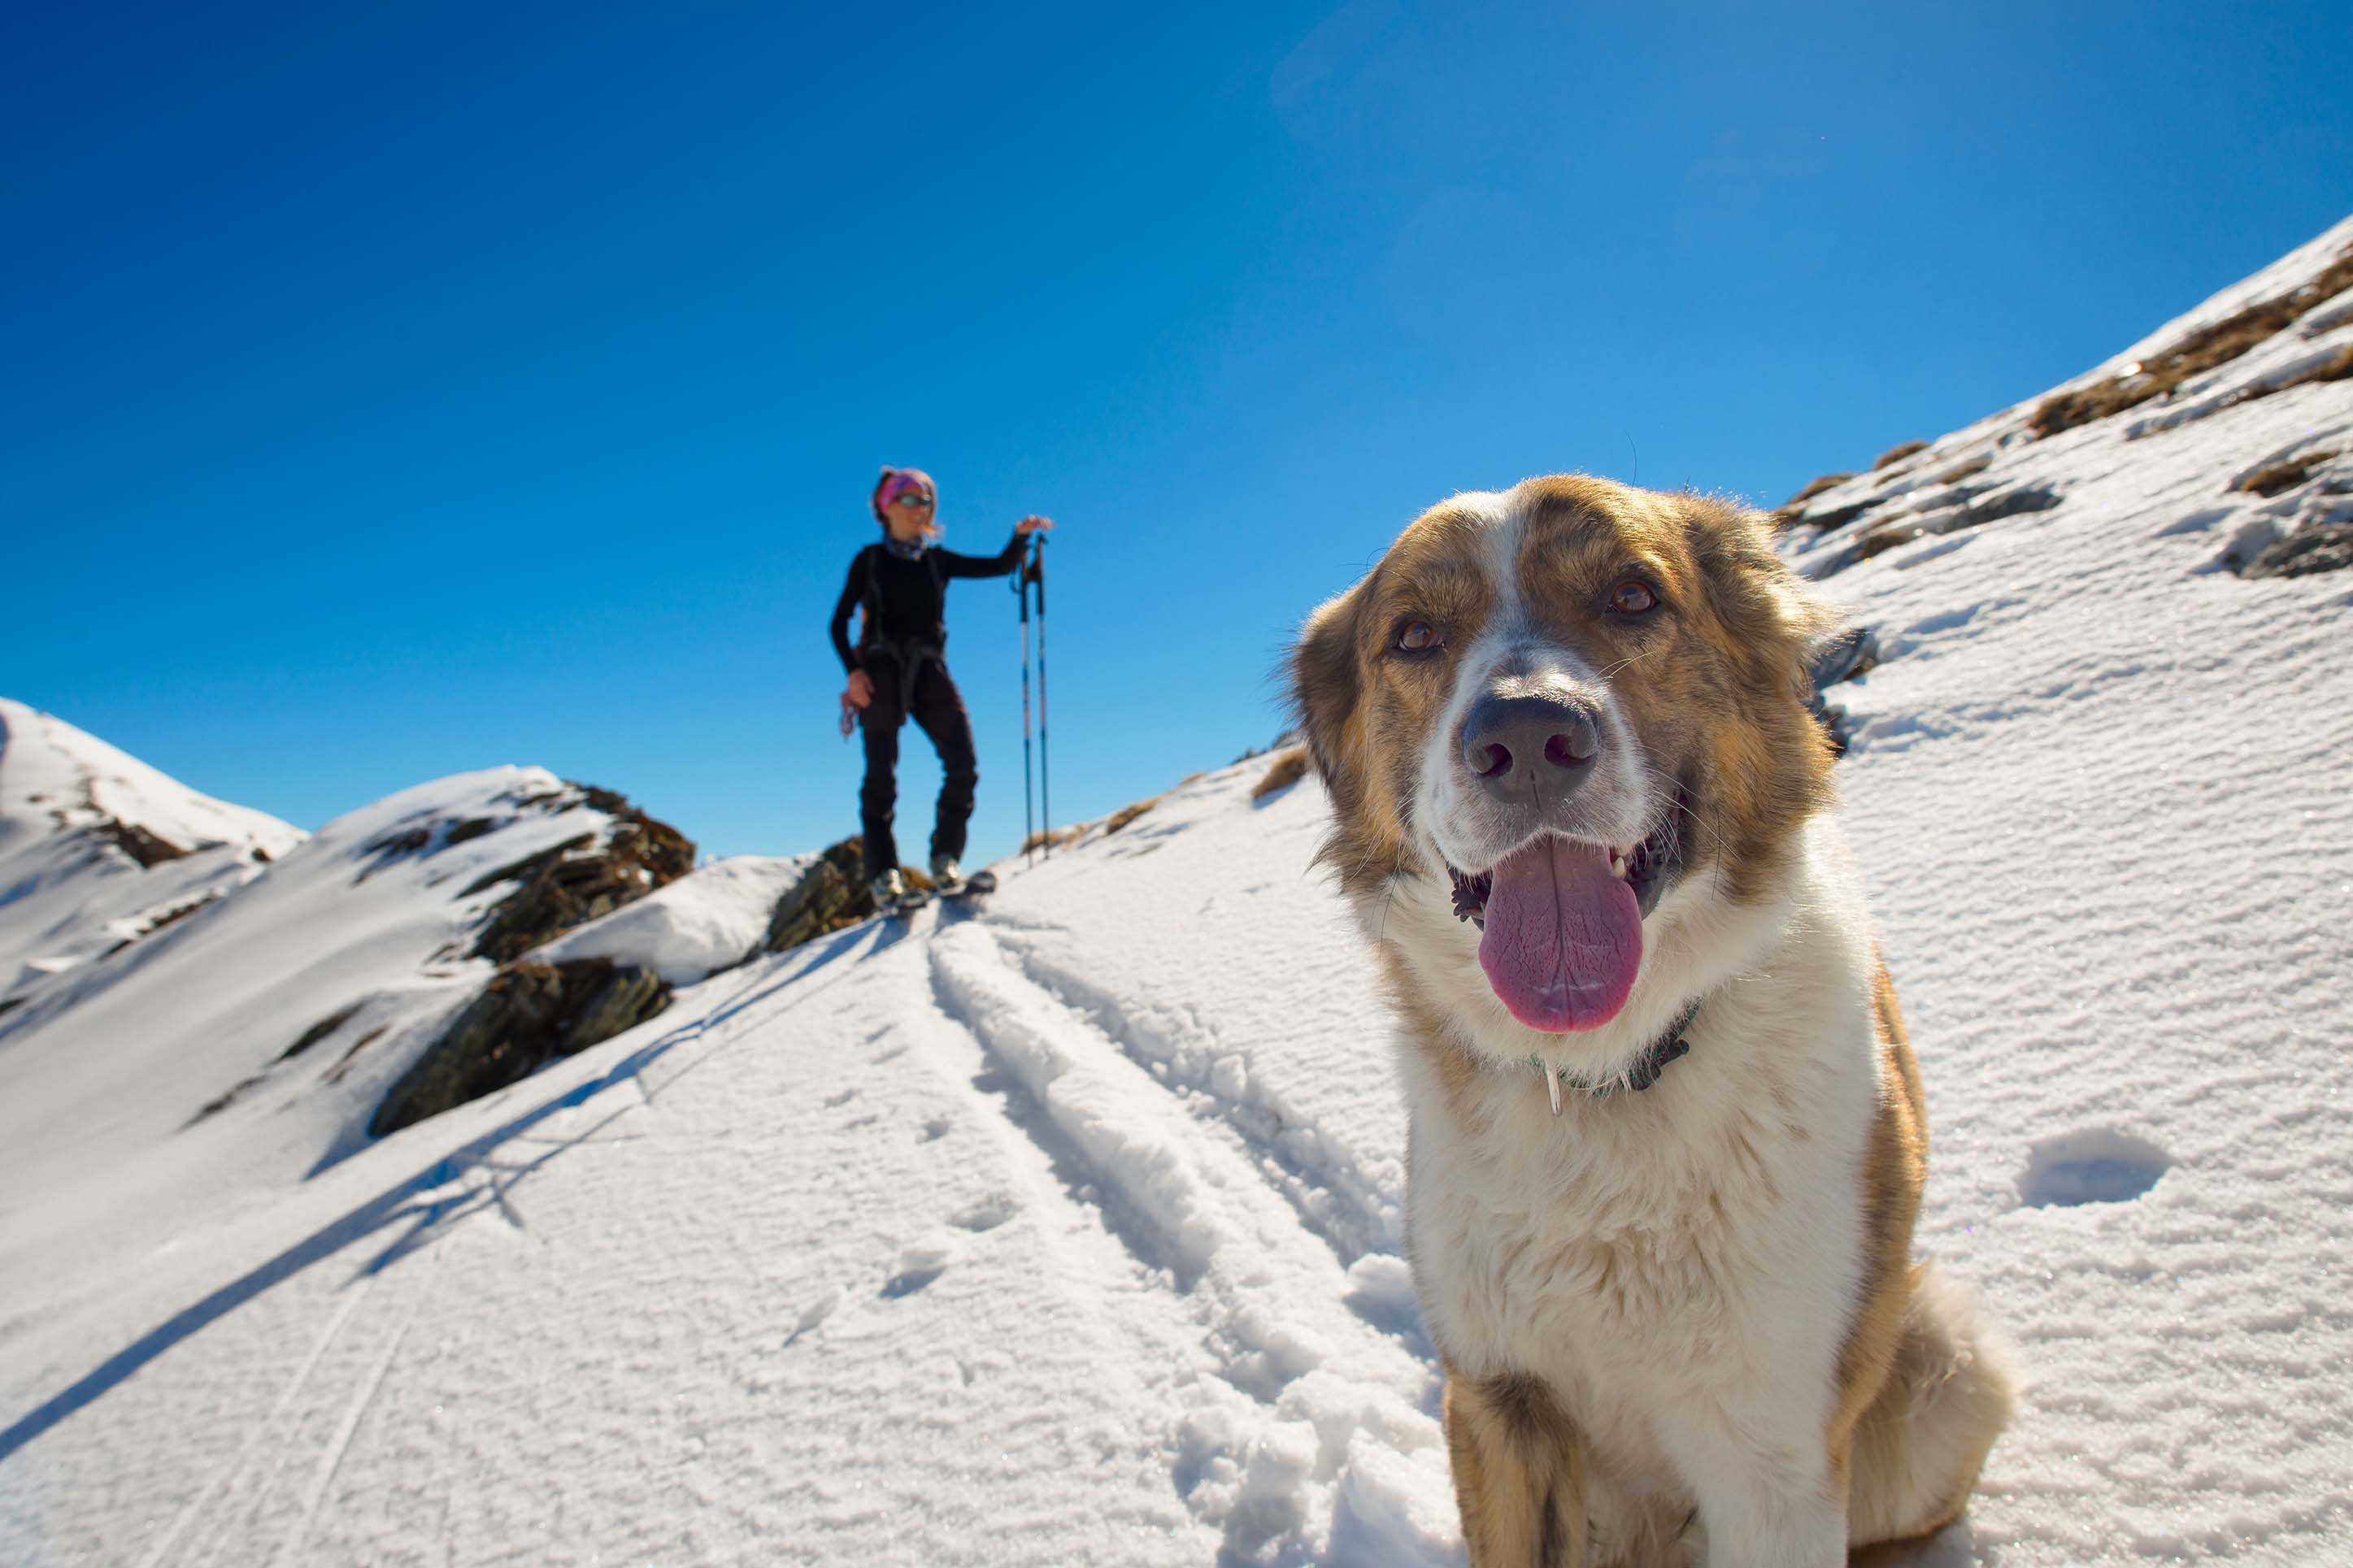 backcountry skiing with a dog in Montana